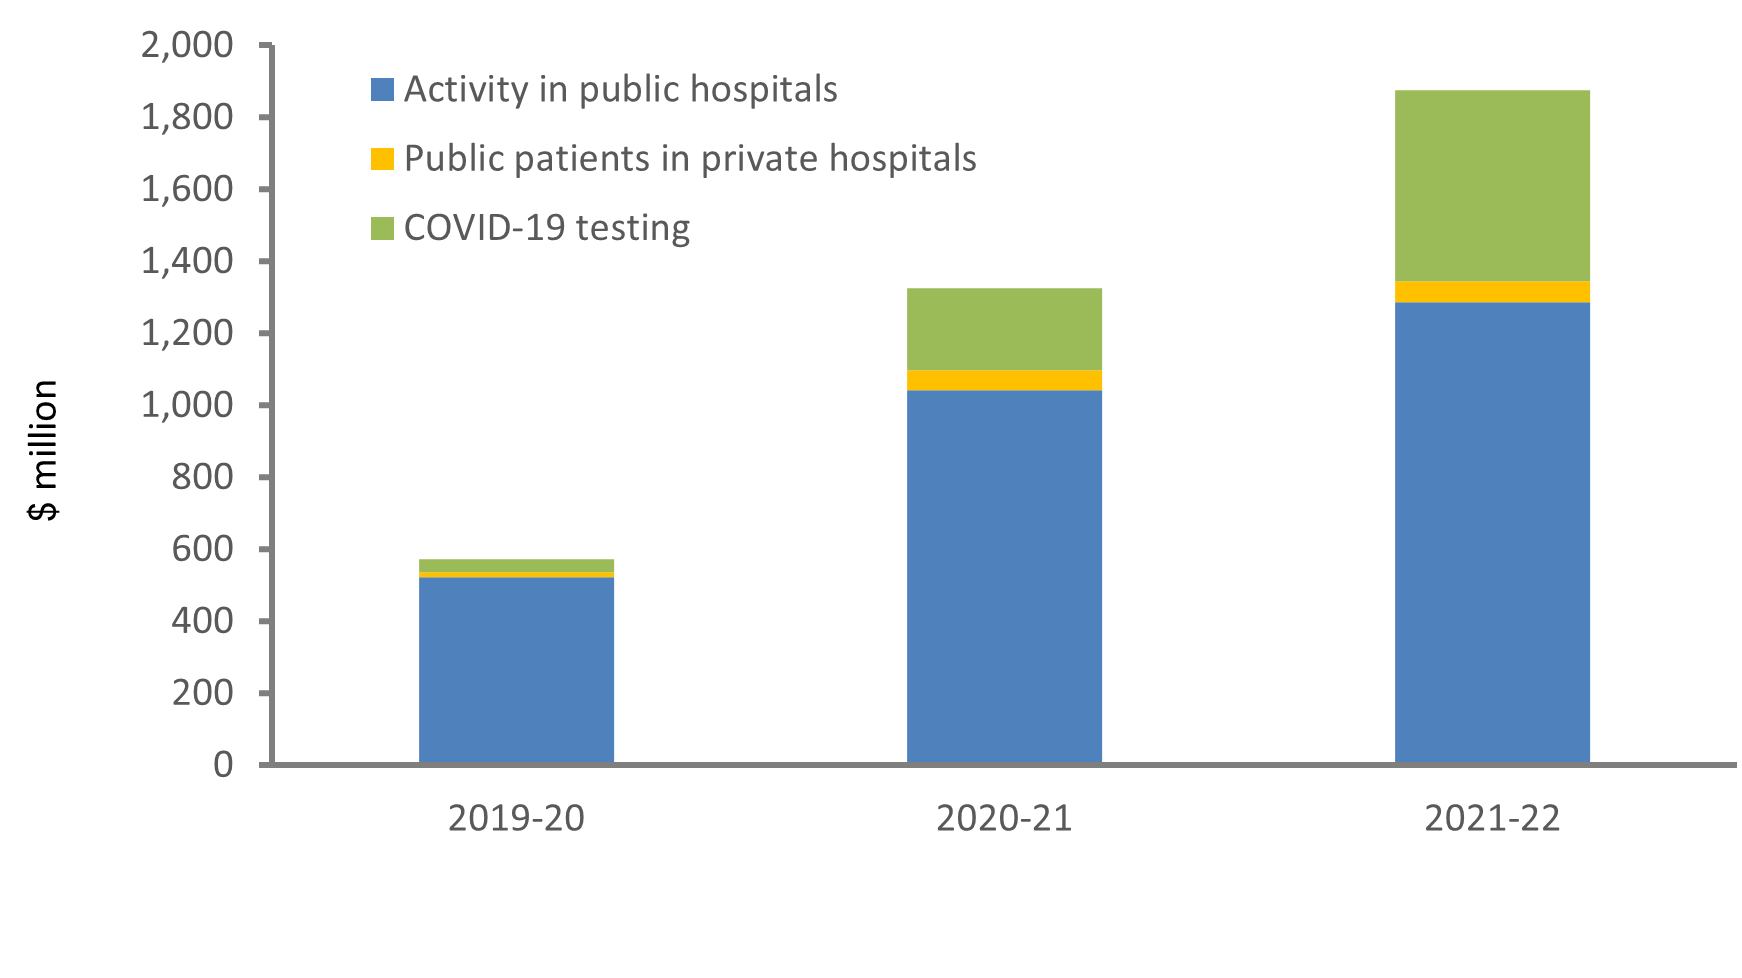 The stacked column chart shows Hospital Services payments from 2019-20 to 2021-22 by public hospital activity, COVID-19 testing, public patient hospital services in private hospitals. While the payments increased with each year, the highest payment was for public hospital activity every year. 